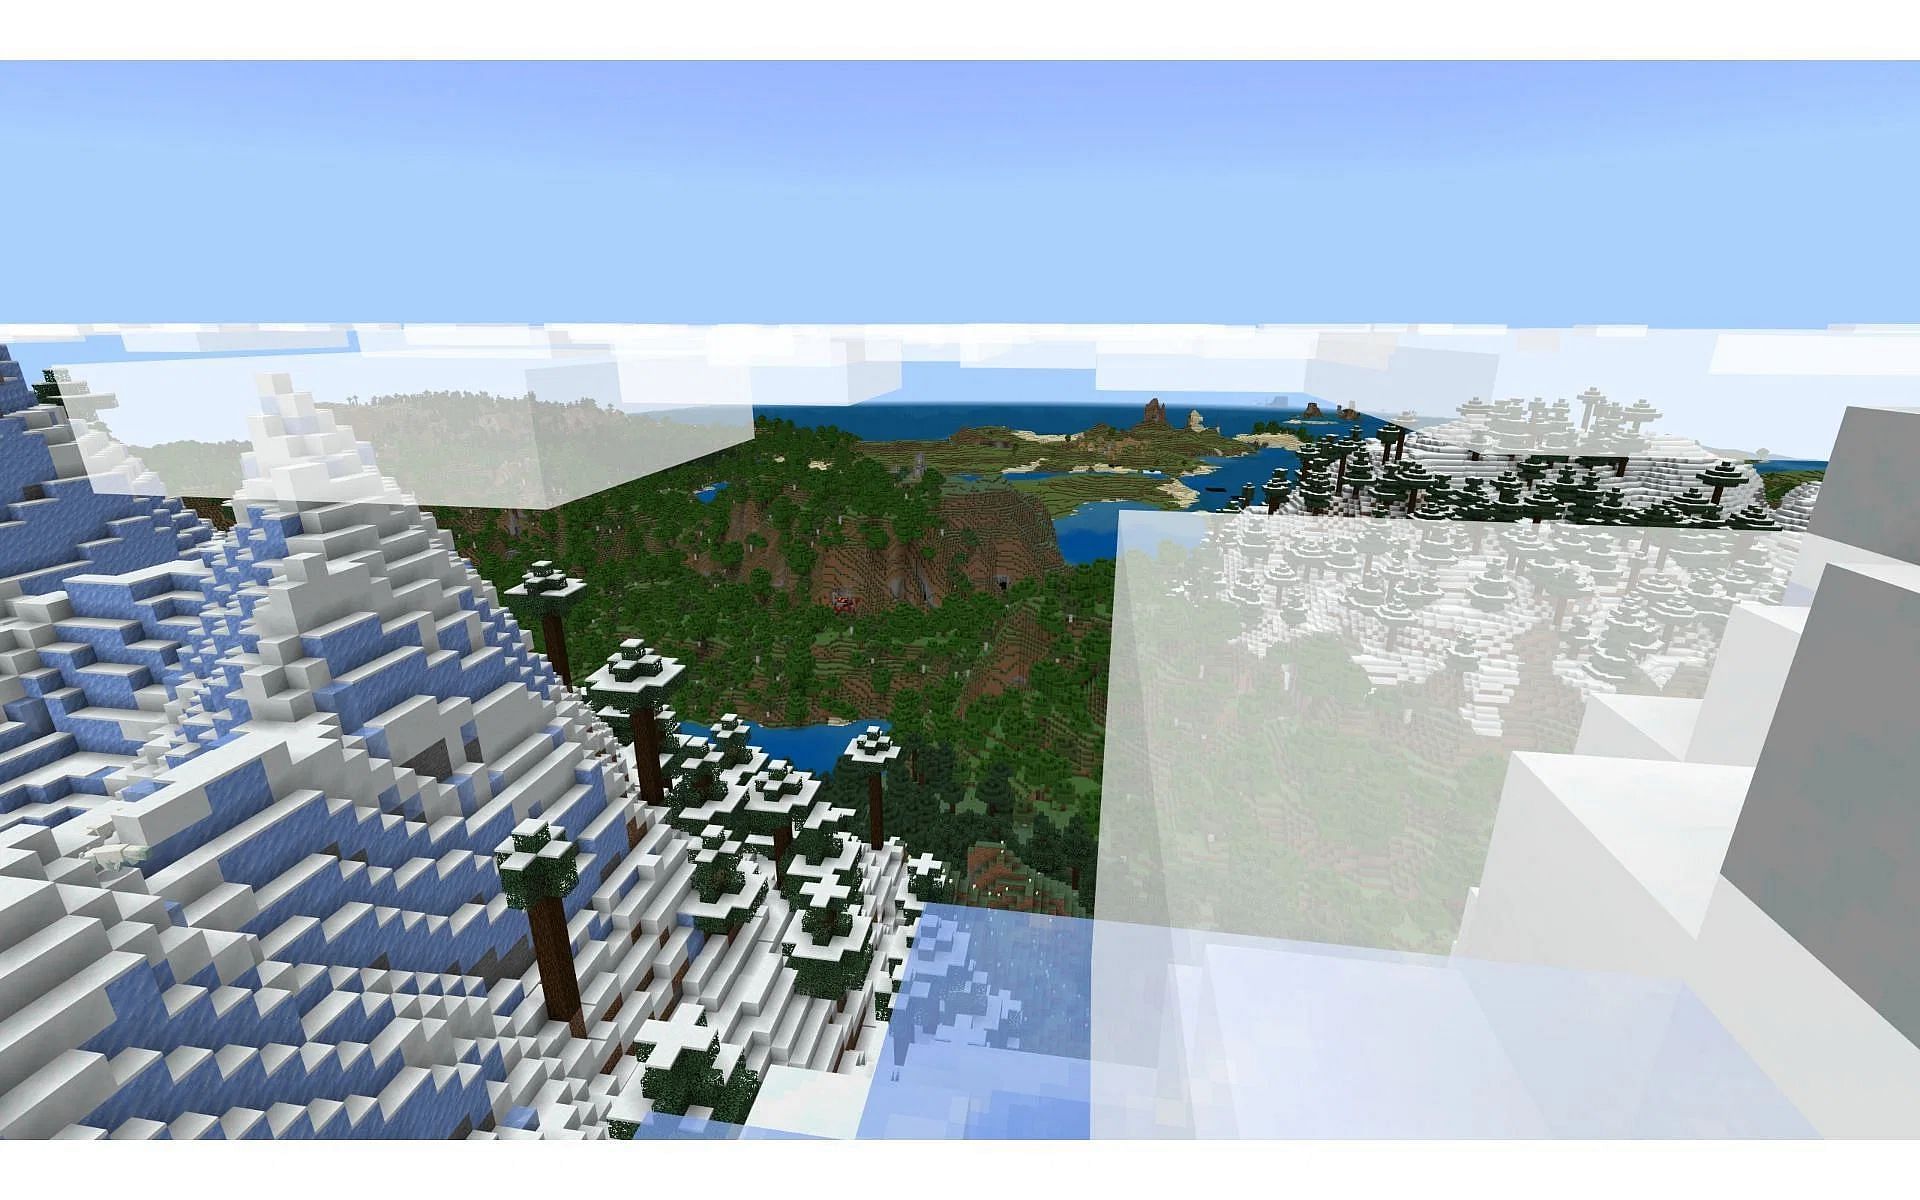 A short walk from spawn, players will encounter a village with a docked ship on the outskirts of the snow (Image via Mojang)